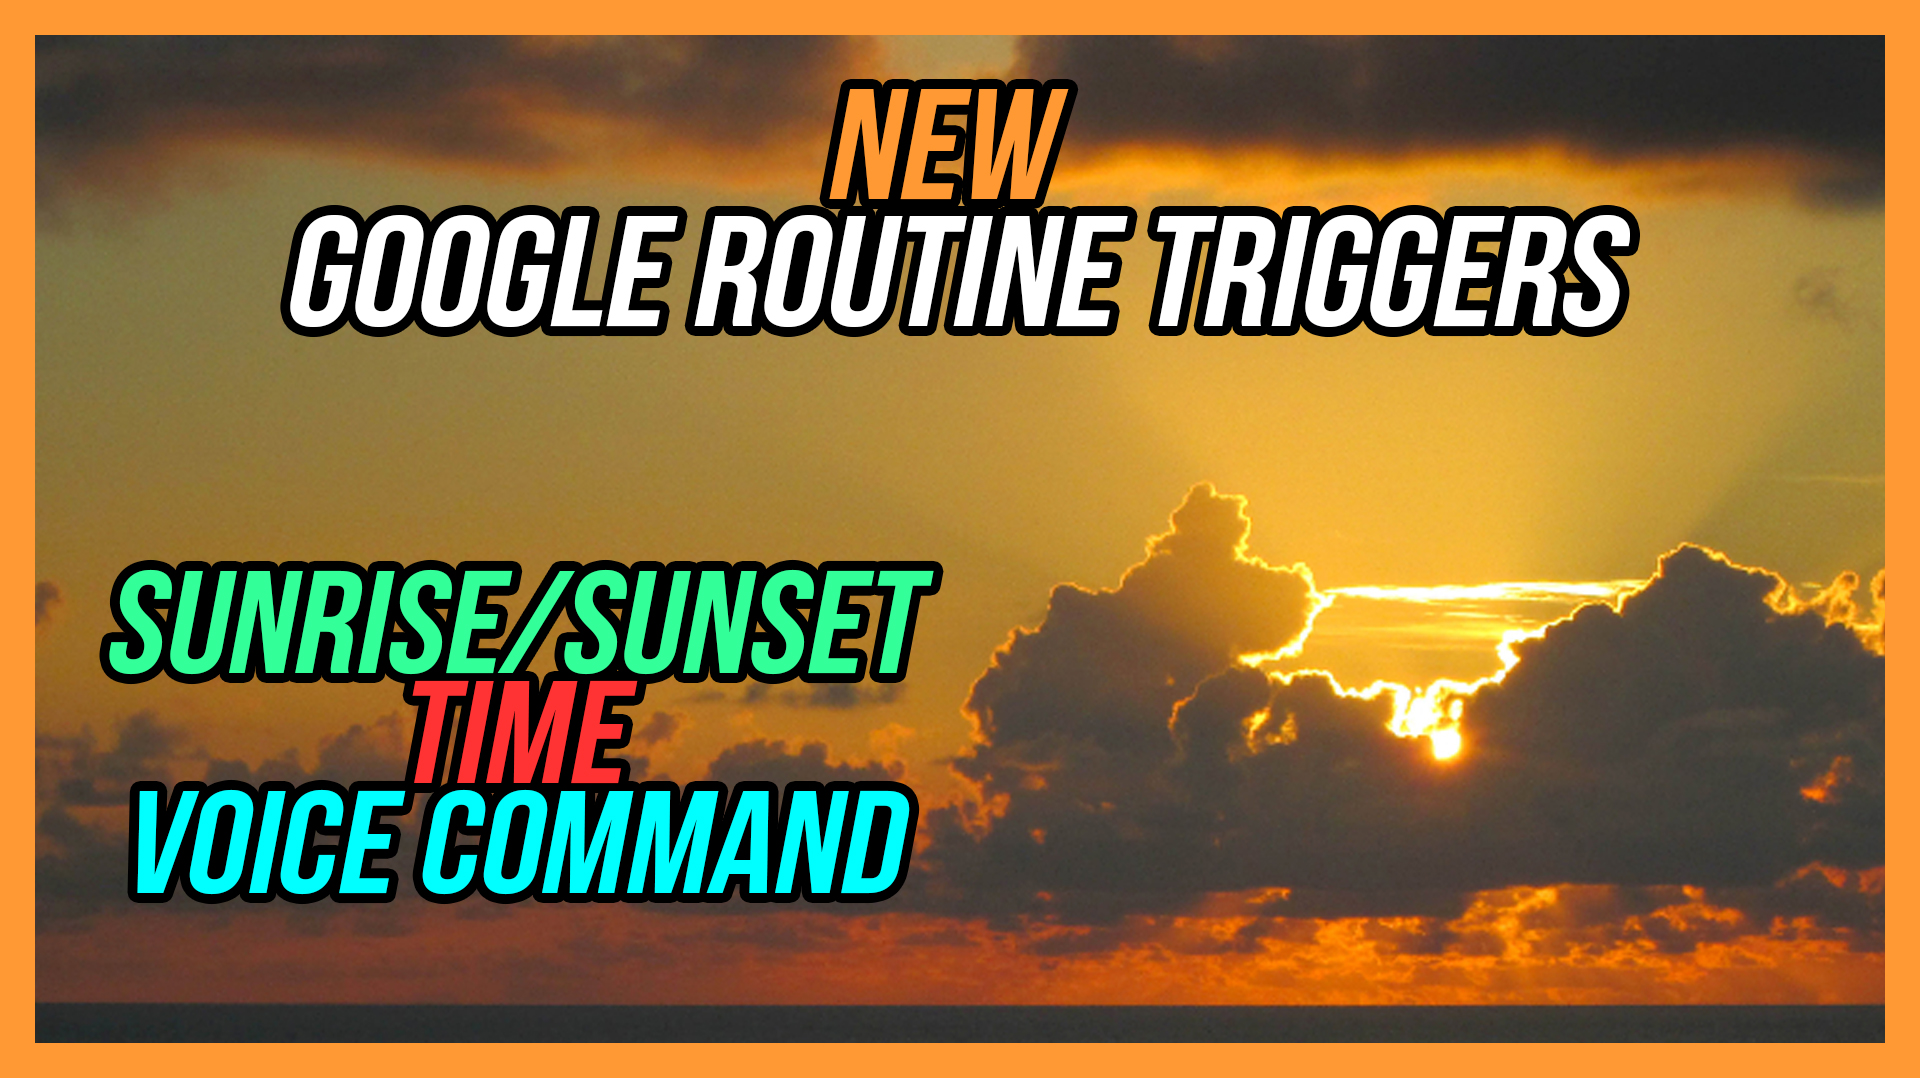 How to Setup Google Assistant Routine Trigger using Sunrise/Sunset, Time and Voice Command on the Google Home App